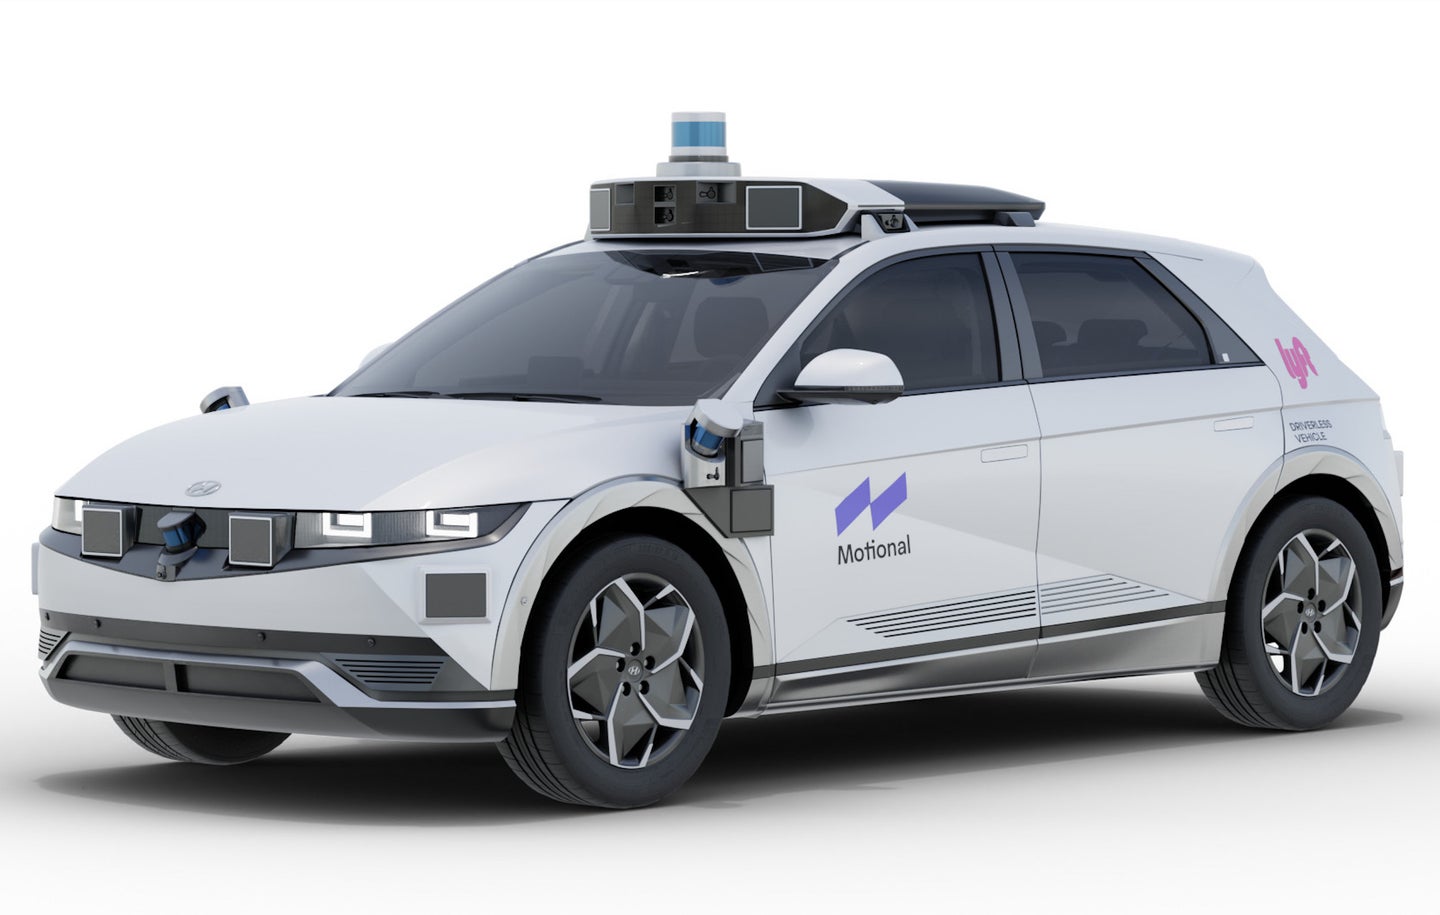 Promo photo of Lyft and Motional's self-driving Ioniq 5 robotaxi